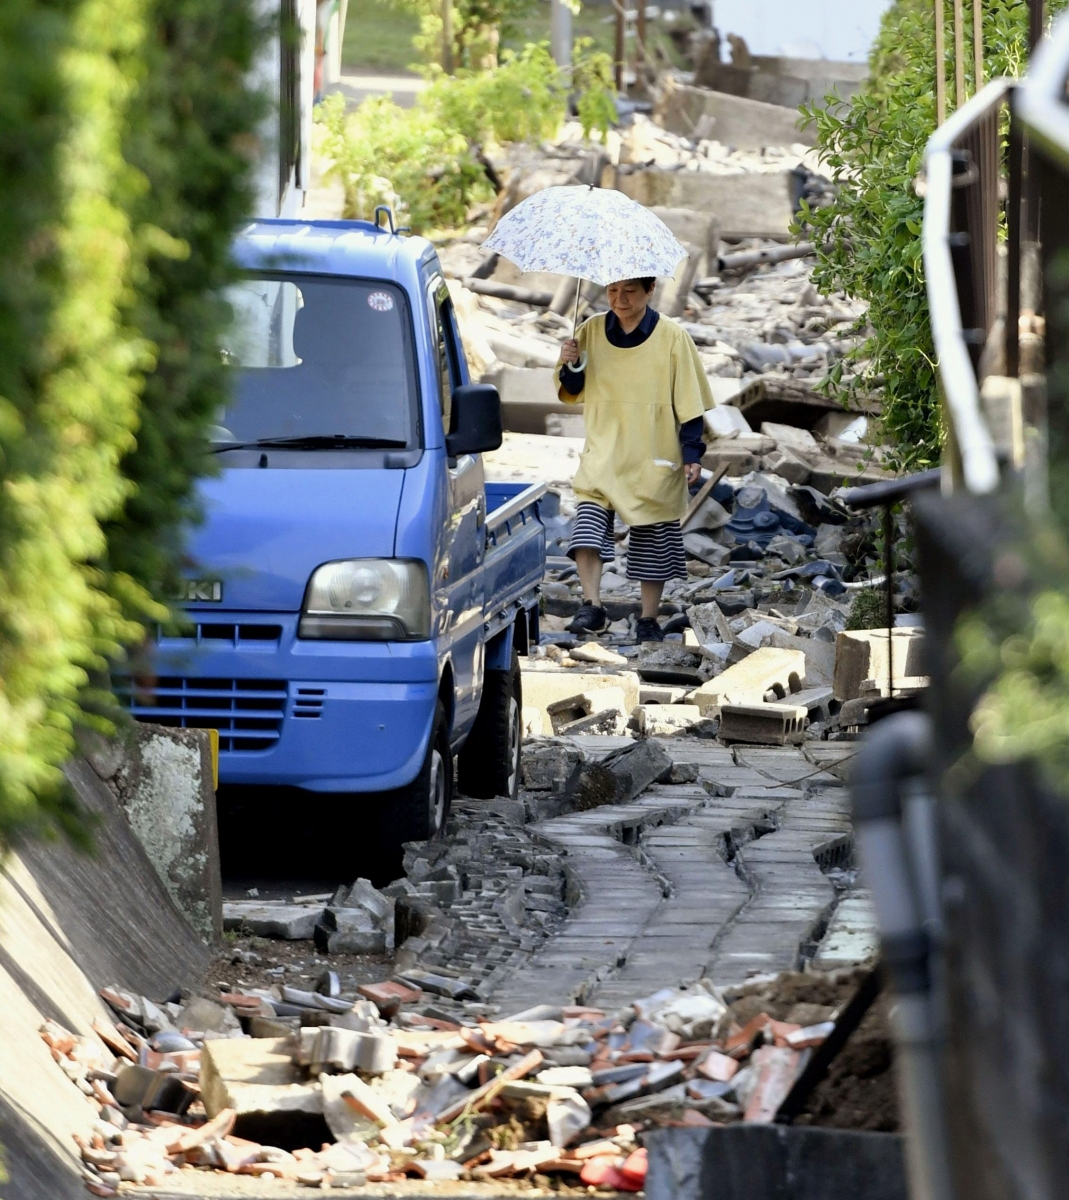 A resident walks through the debris after a magnitude-6.5 earthquake in Mashiki, Kumamoto prefecture, southern Japan, Friday, April 15, 2016.  More than 100 aftershocks from Thursday night's earthquake continued to rattle the region as businesses and residents got a fuller look at the widespread damage from the unusually strong quake, which also injured about 800 people. (Kyodo News via AP) JAPAN OUT, MANDATORY CREDIT Japan Earthquake